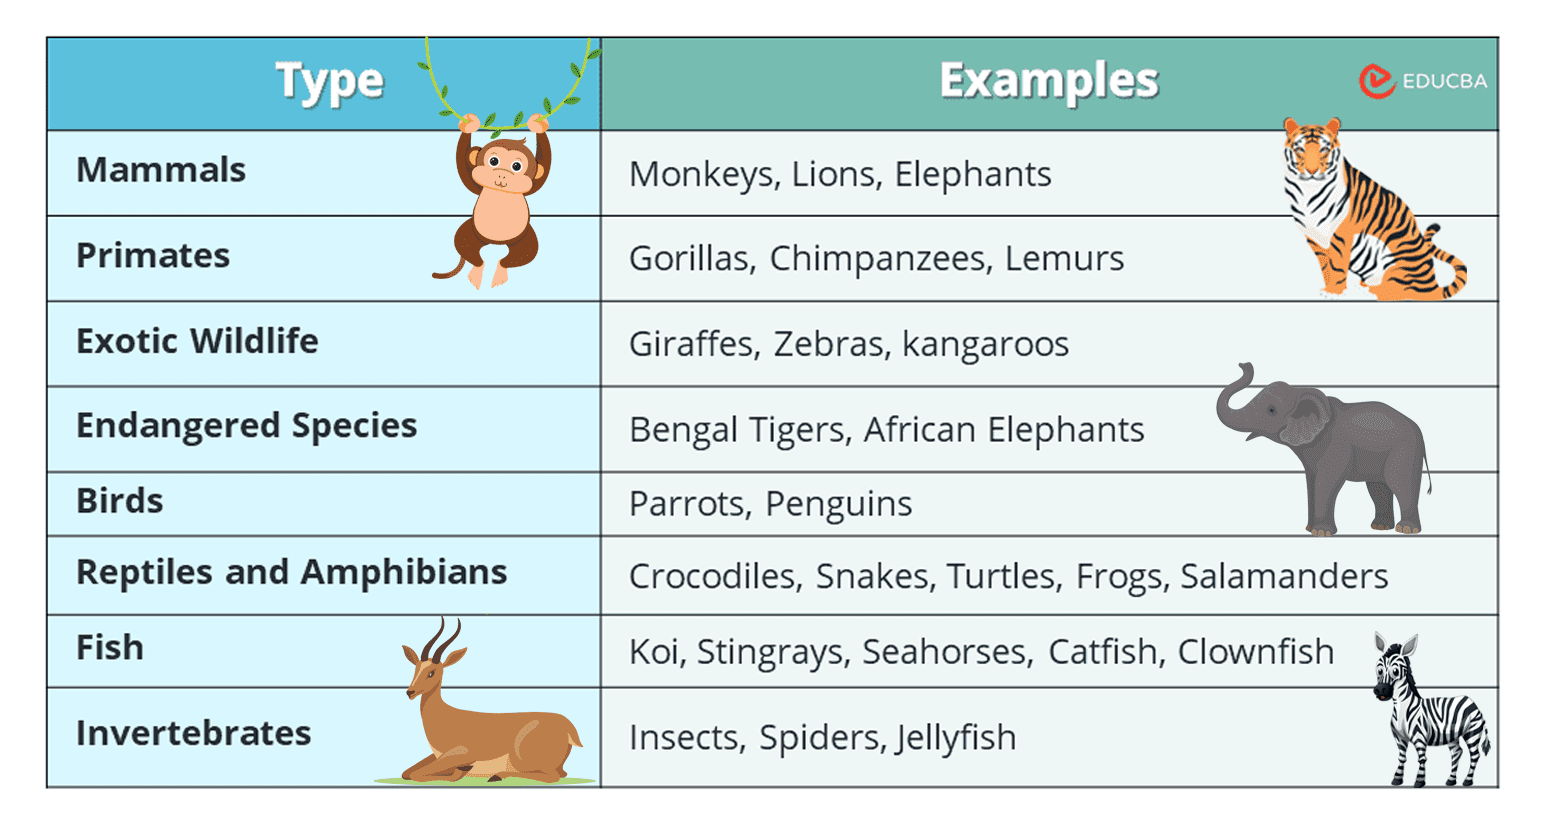 Essay on Zoos - Types of Animals in Zoos